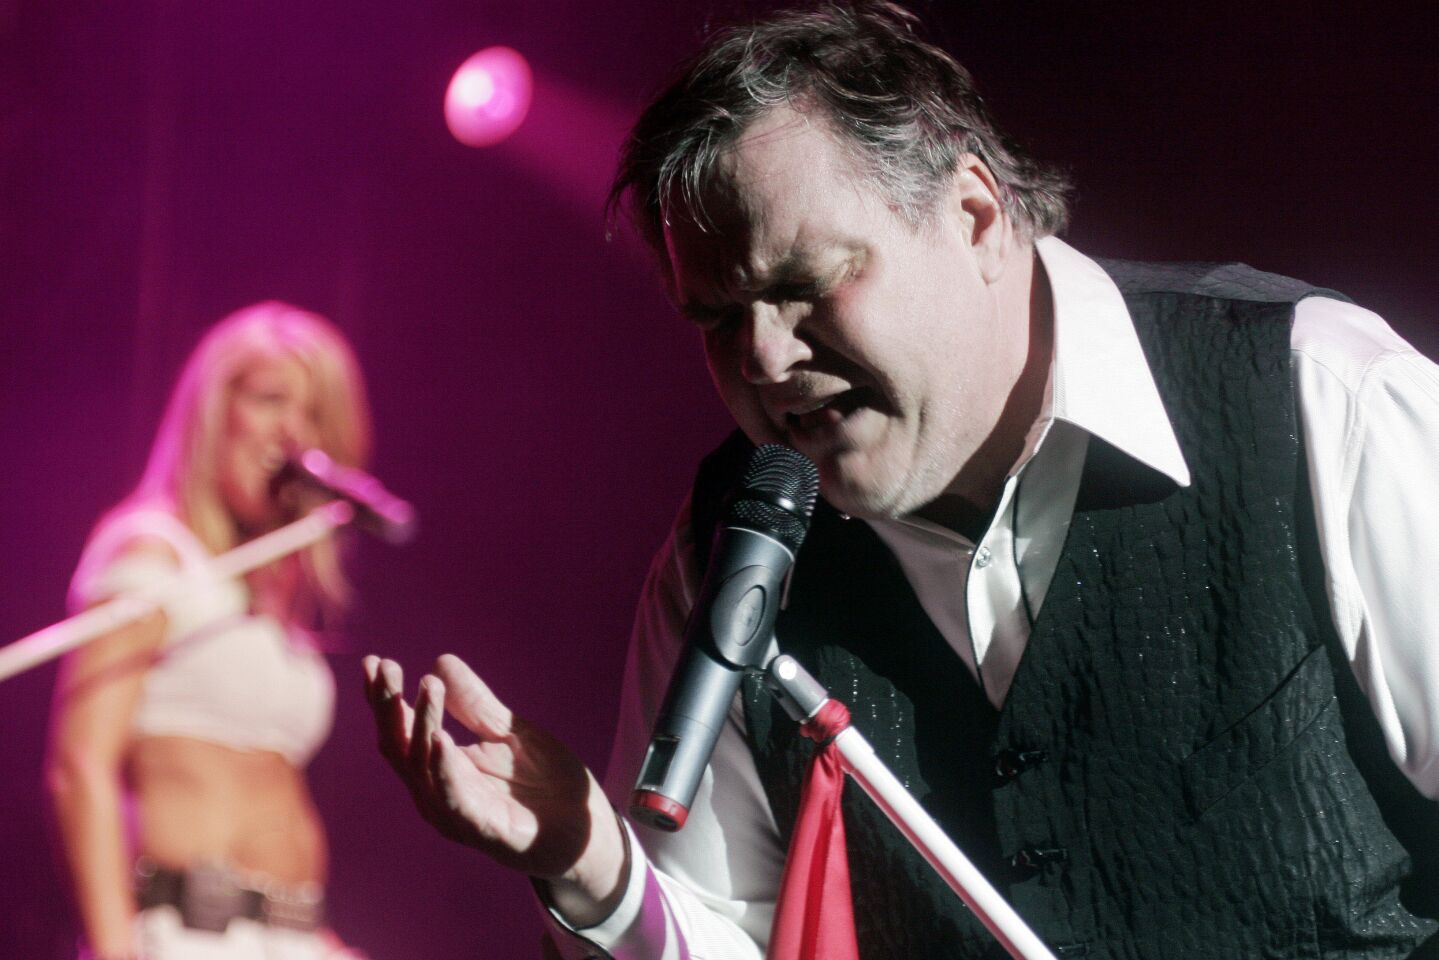 Meat Loaf, a rock superstar who shot to stardom with the 1977 album “Bat Out of Hell" — which featured such theatrical anthems as “Two Out of Three Ain’t Bad” and “I’d Do Anything for Love (But I Won’t Do That)” — died at 74. Meat Loaf channeled his love of musical theater into rock ‘n’ roll and maintained a parallel career as an actor.